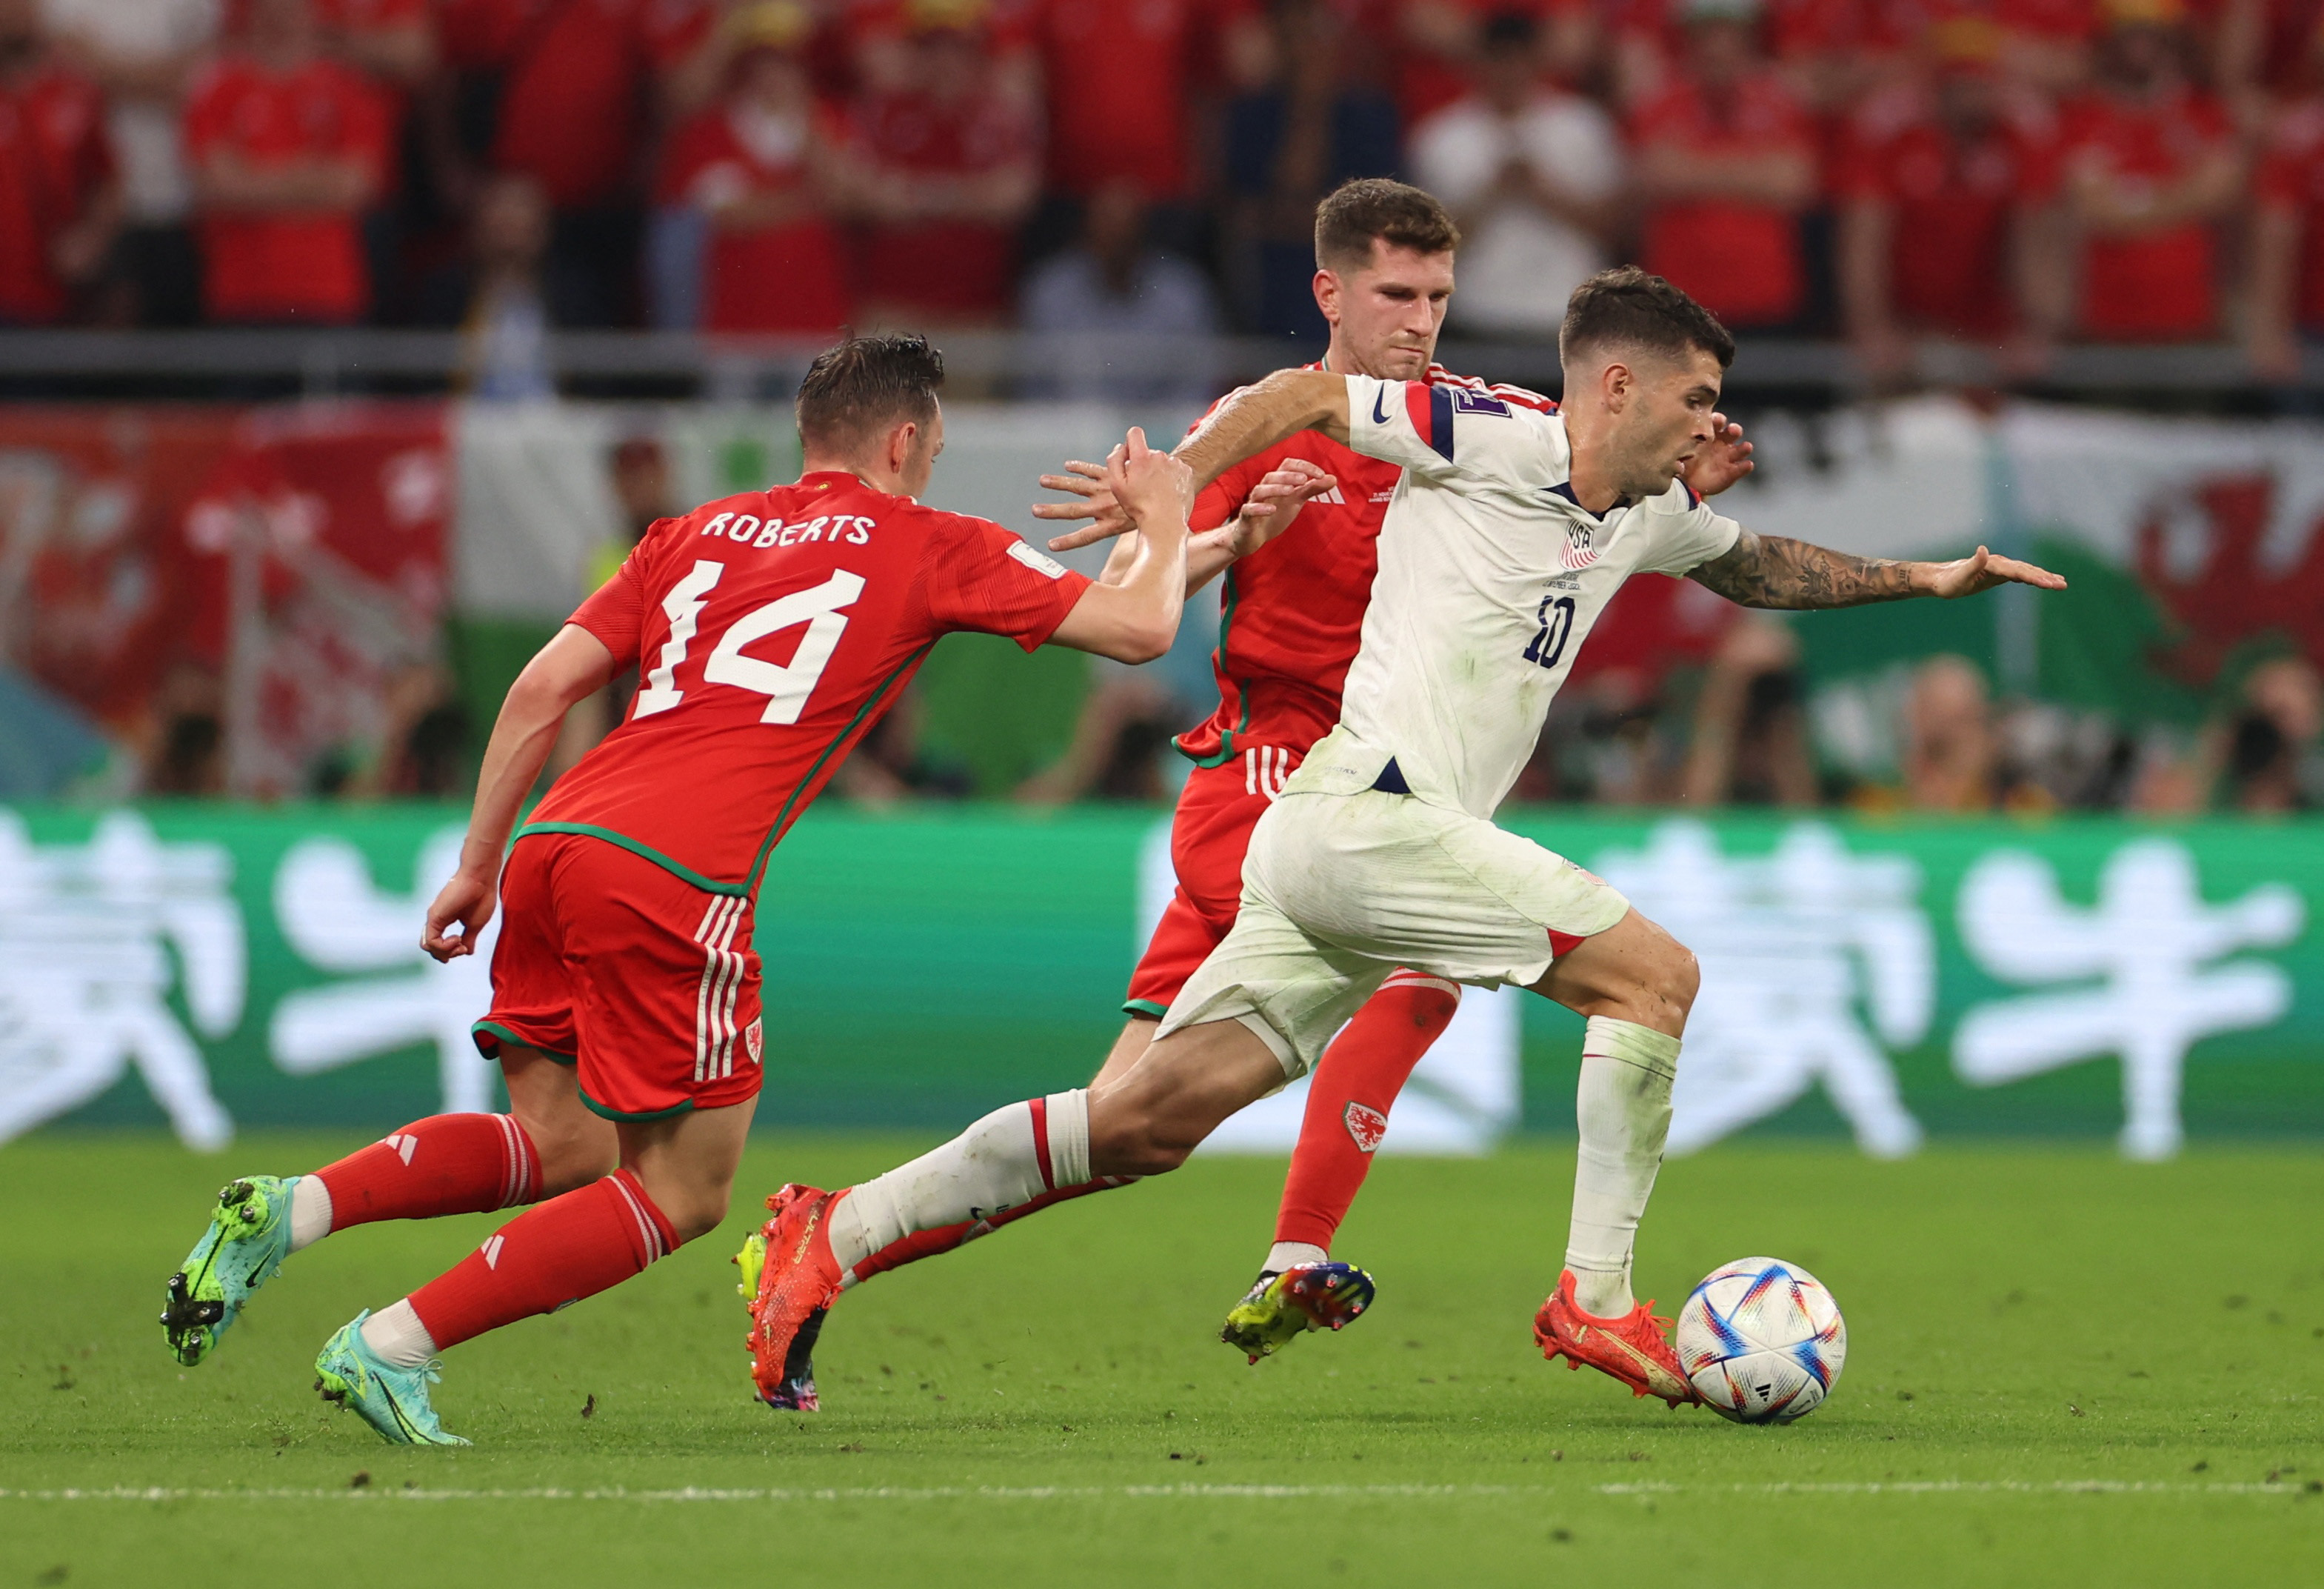 Christian Pulisic escaped between two rivals at sheer speed and perfectly enabled his teammate Timothy Weah to open the scoring (REUTERS/Pedro Nunes)